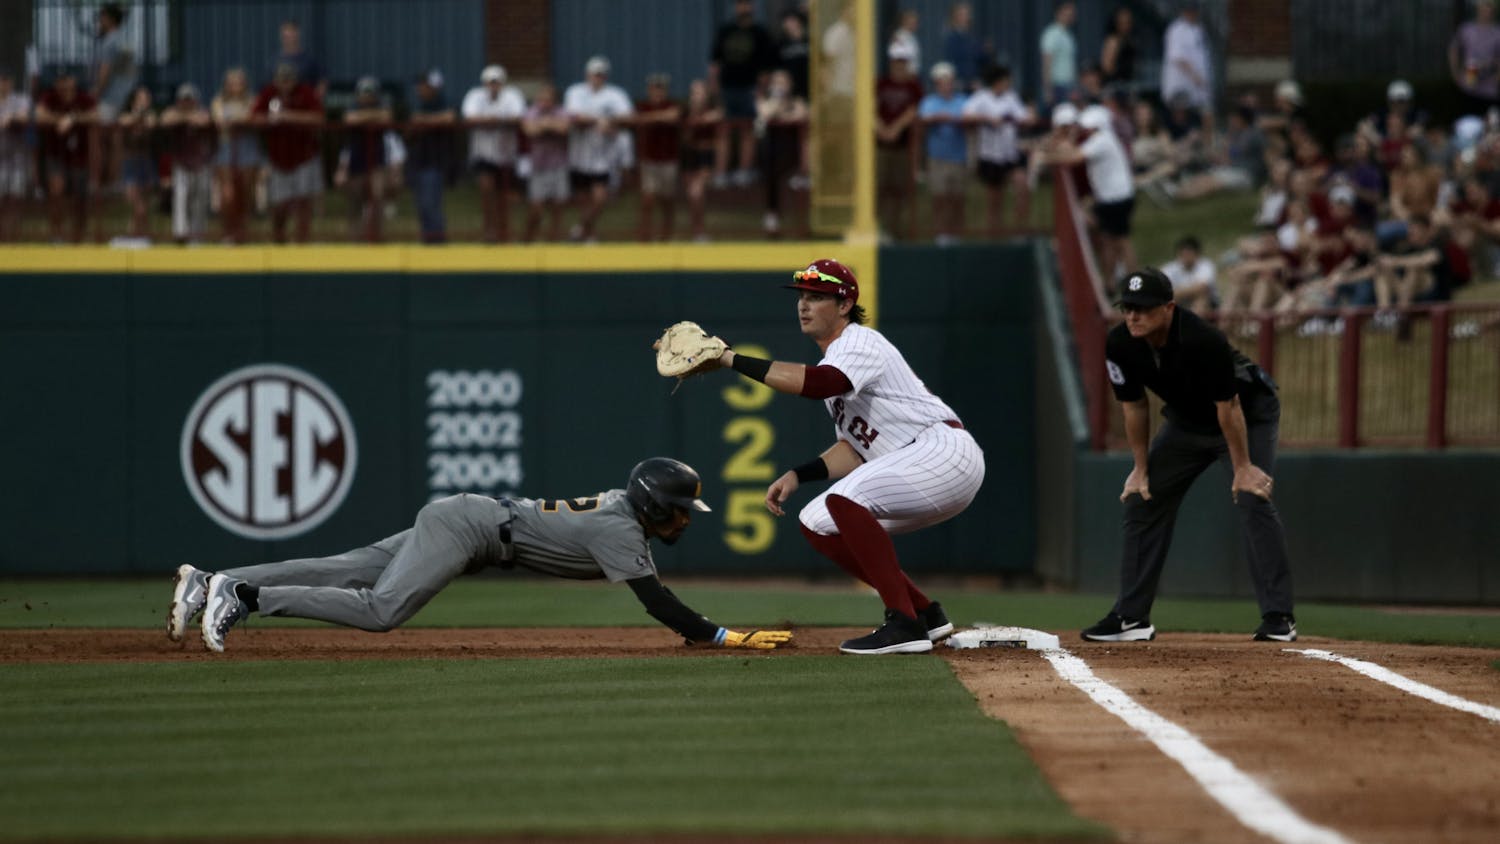 Junior first baseman Gavin Casas catches the ball at first base, striking out the Mizzou opponent after he attempted to steal second base. The Gamecocks take home a 9-8 win in Founders Park on March 23, 2023.&nbsp;